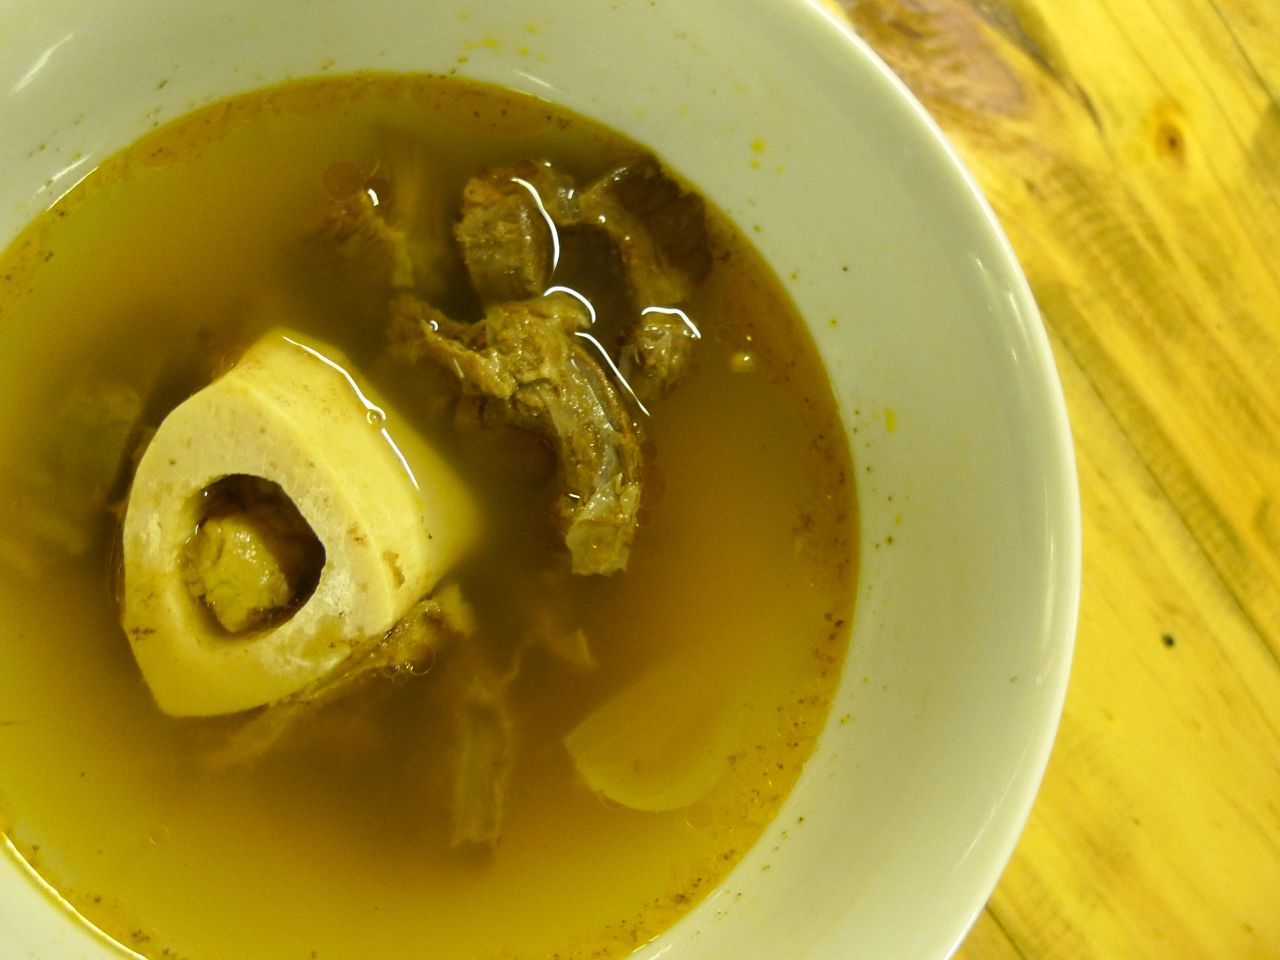 Made from Batangas beef, the broth is rich with flavors while the bones are big -- meaning more bone marrow to enjoy.